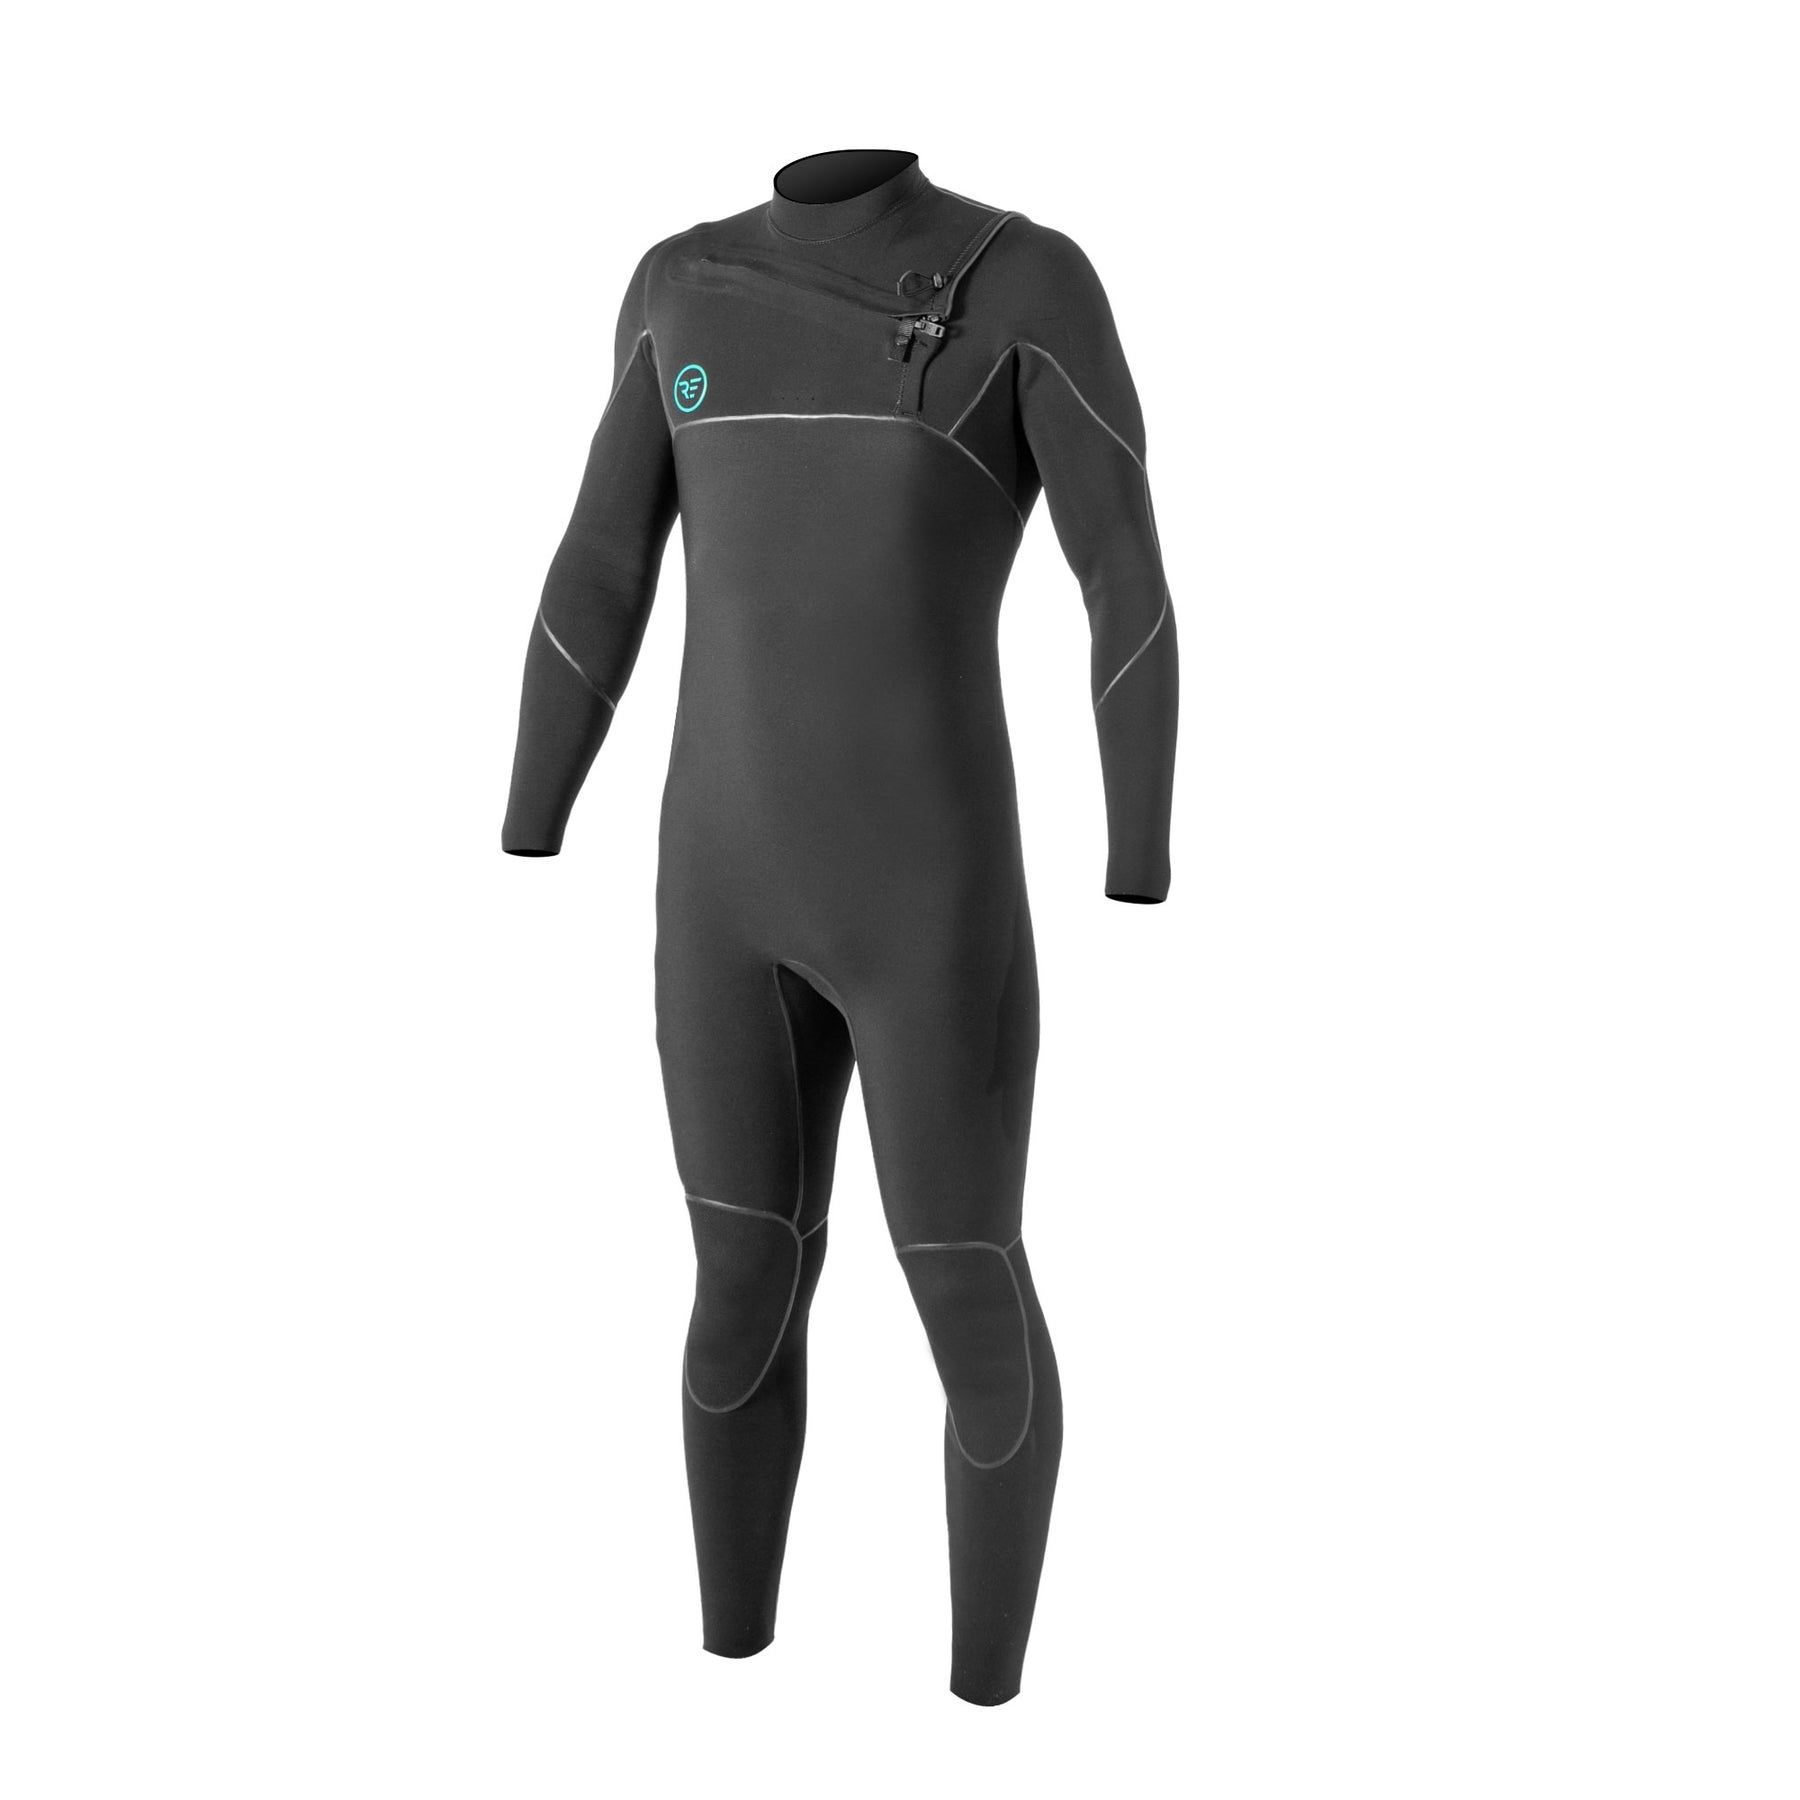 Ride Engine Apoc 4/3 FZ Wetsuit – LT – The Foiling Collective